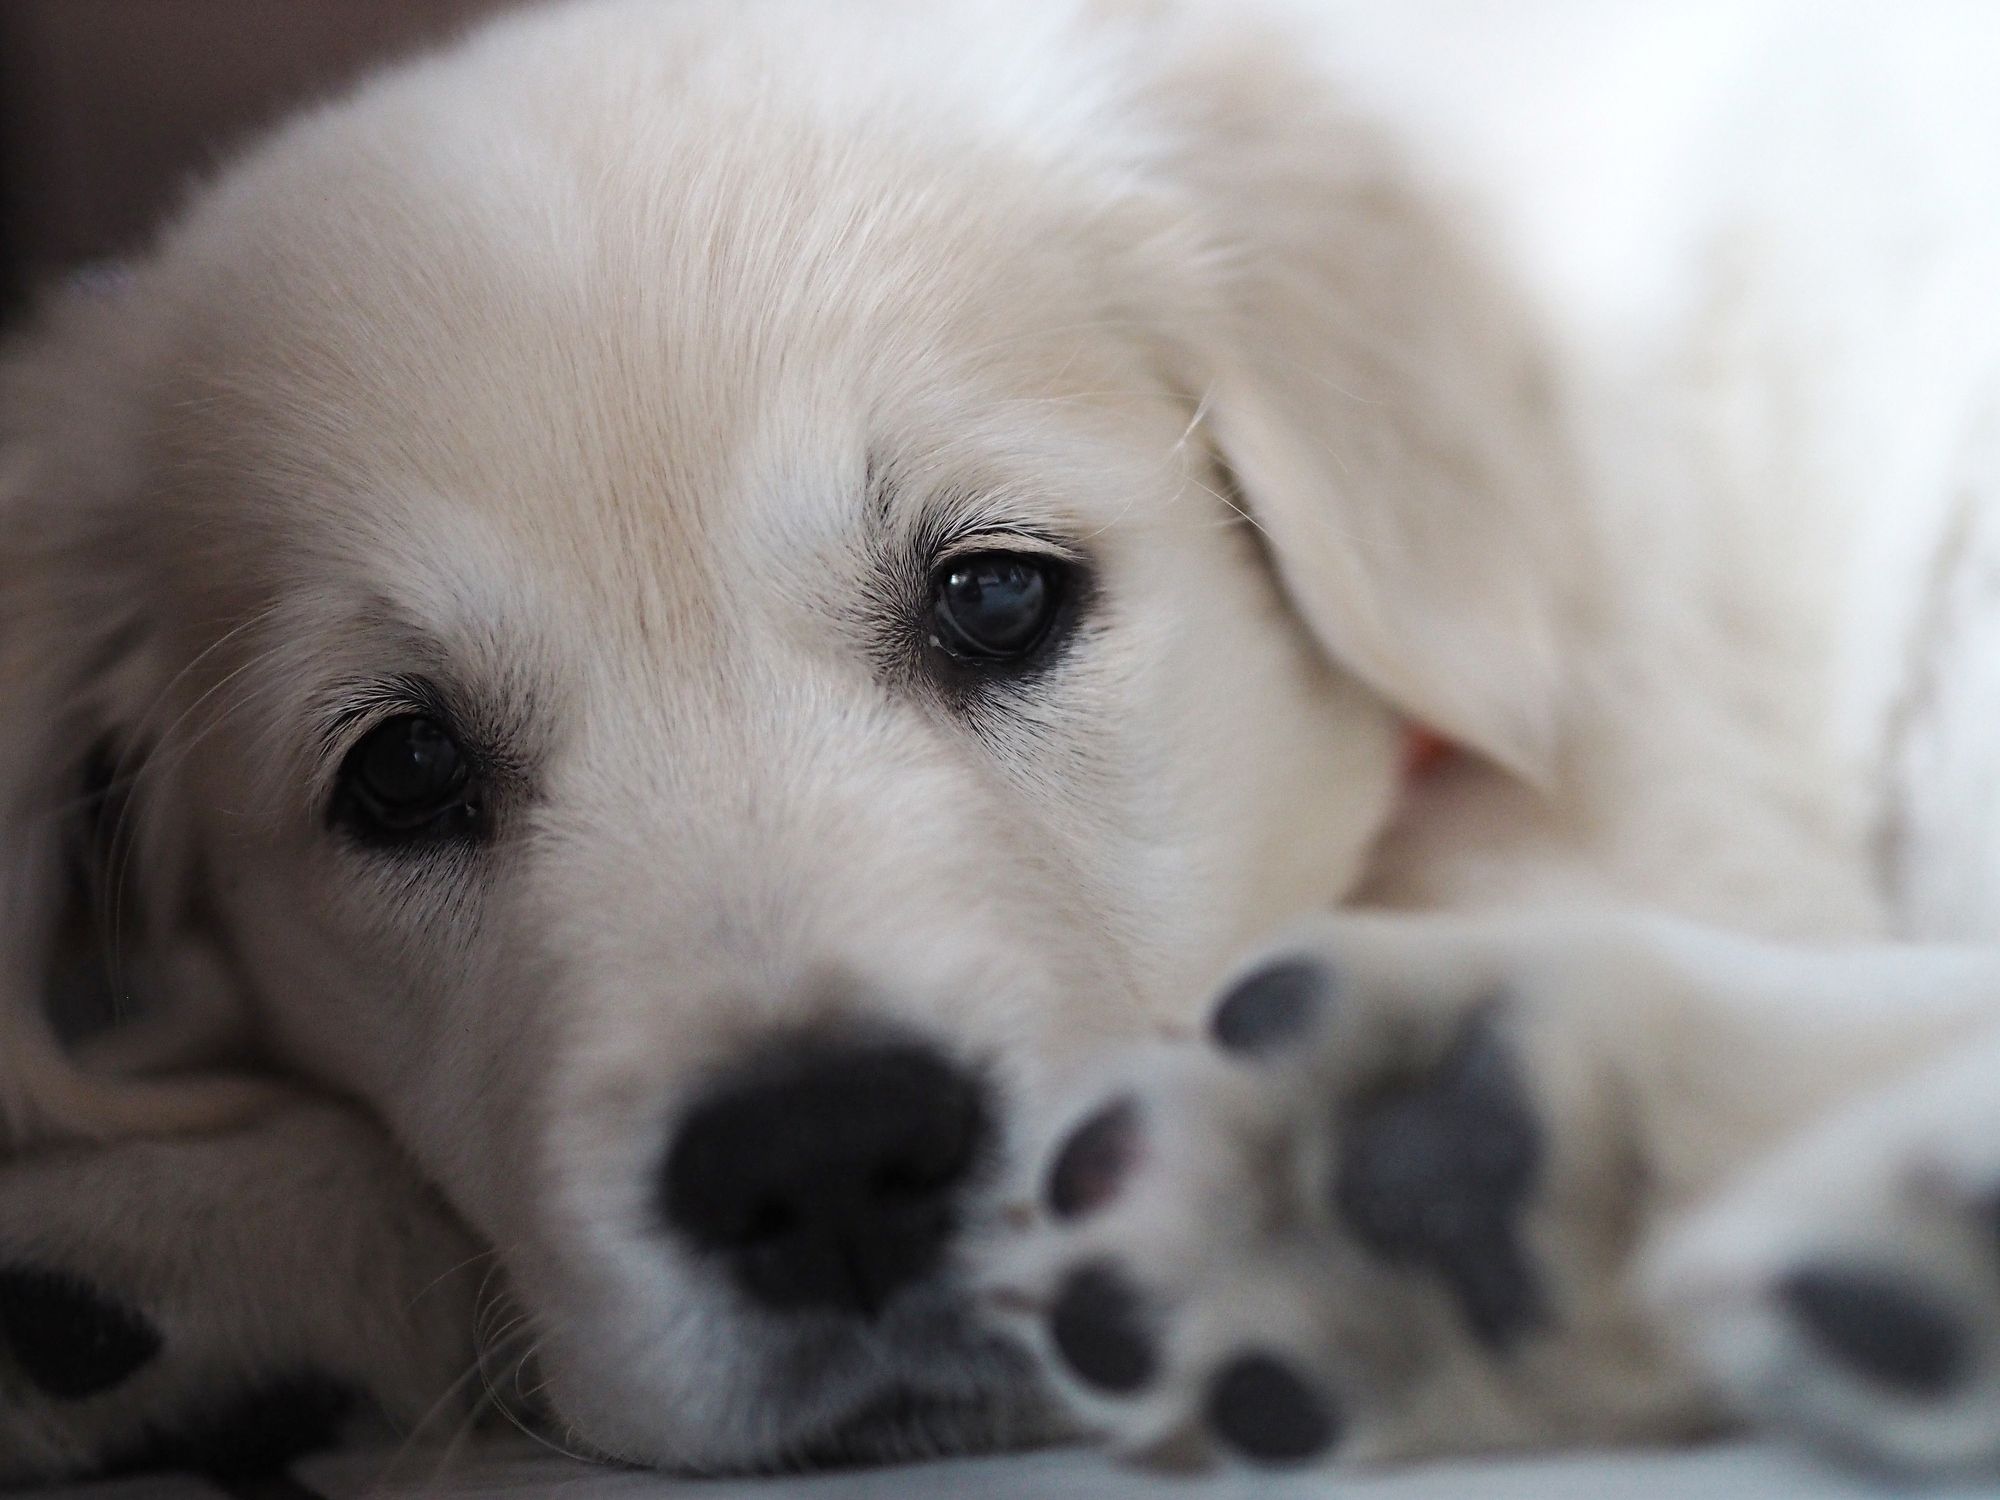 Puppy lying down and looking at the camera. | Photo: Getty Images